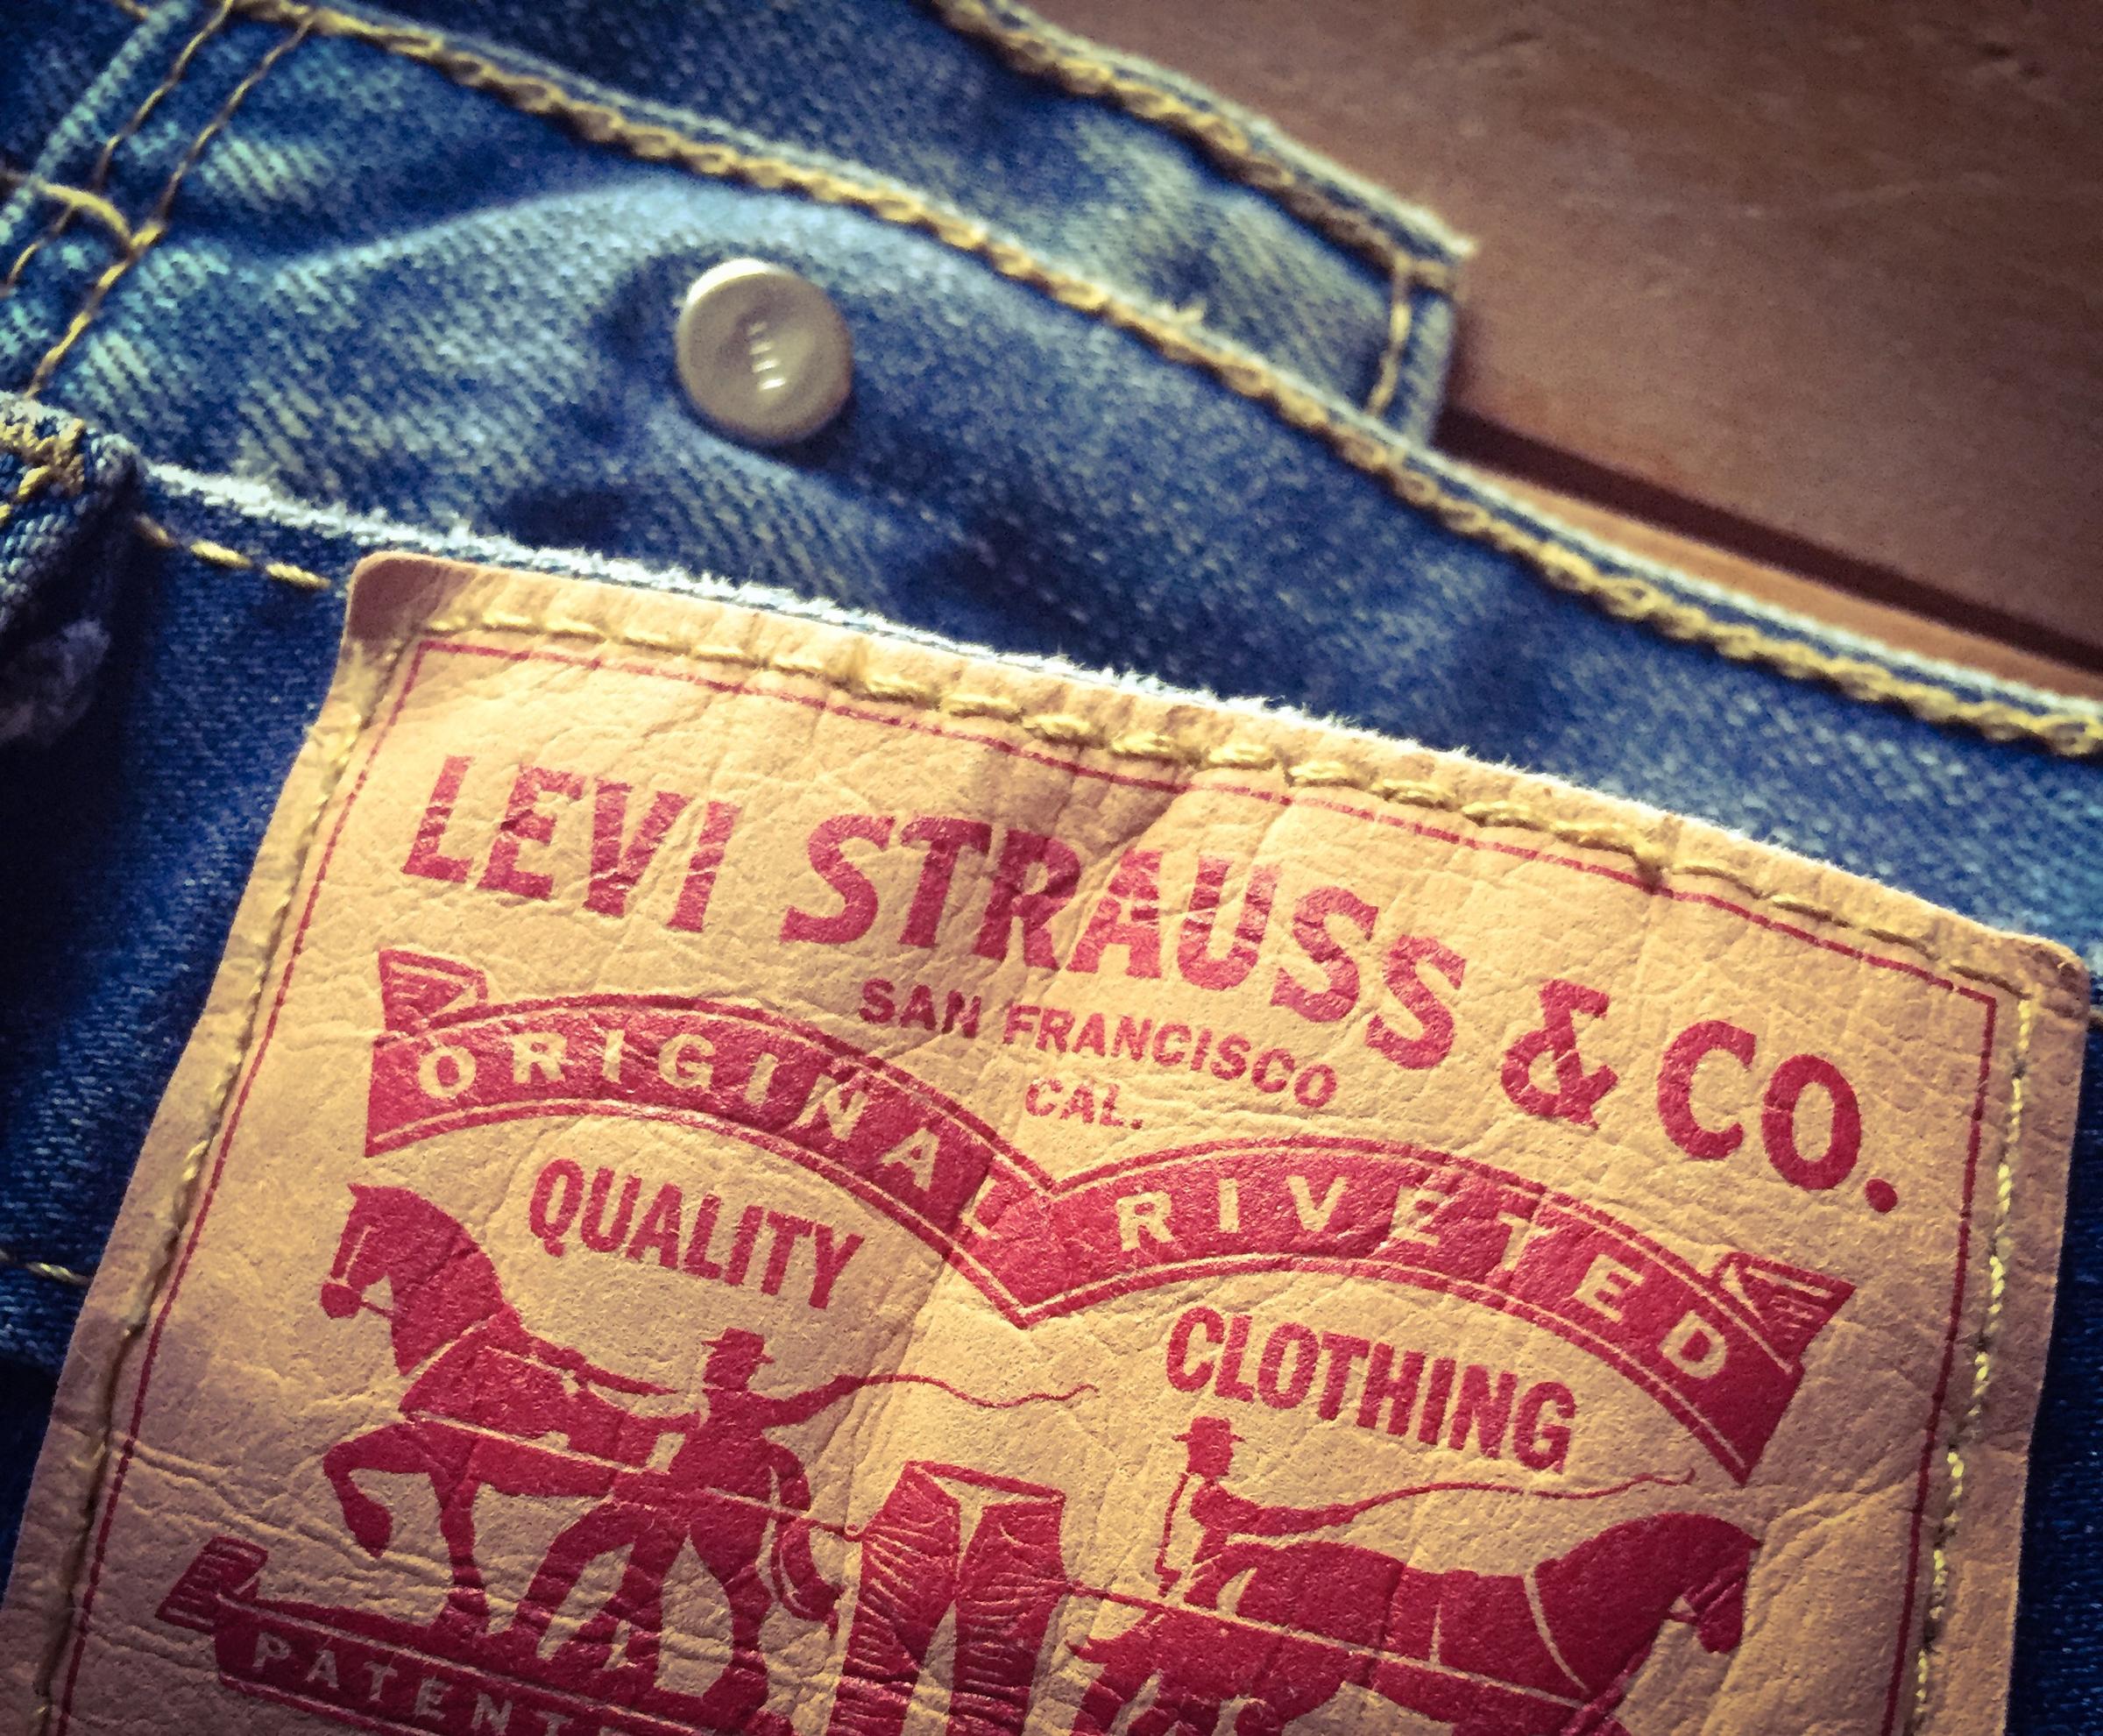 125-year-old-levi-s-sold-for-nearly-100k-denim-produced-at-n-h-mill